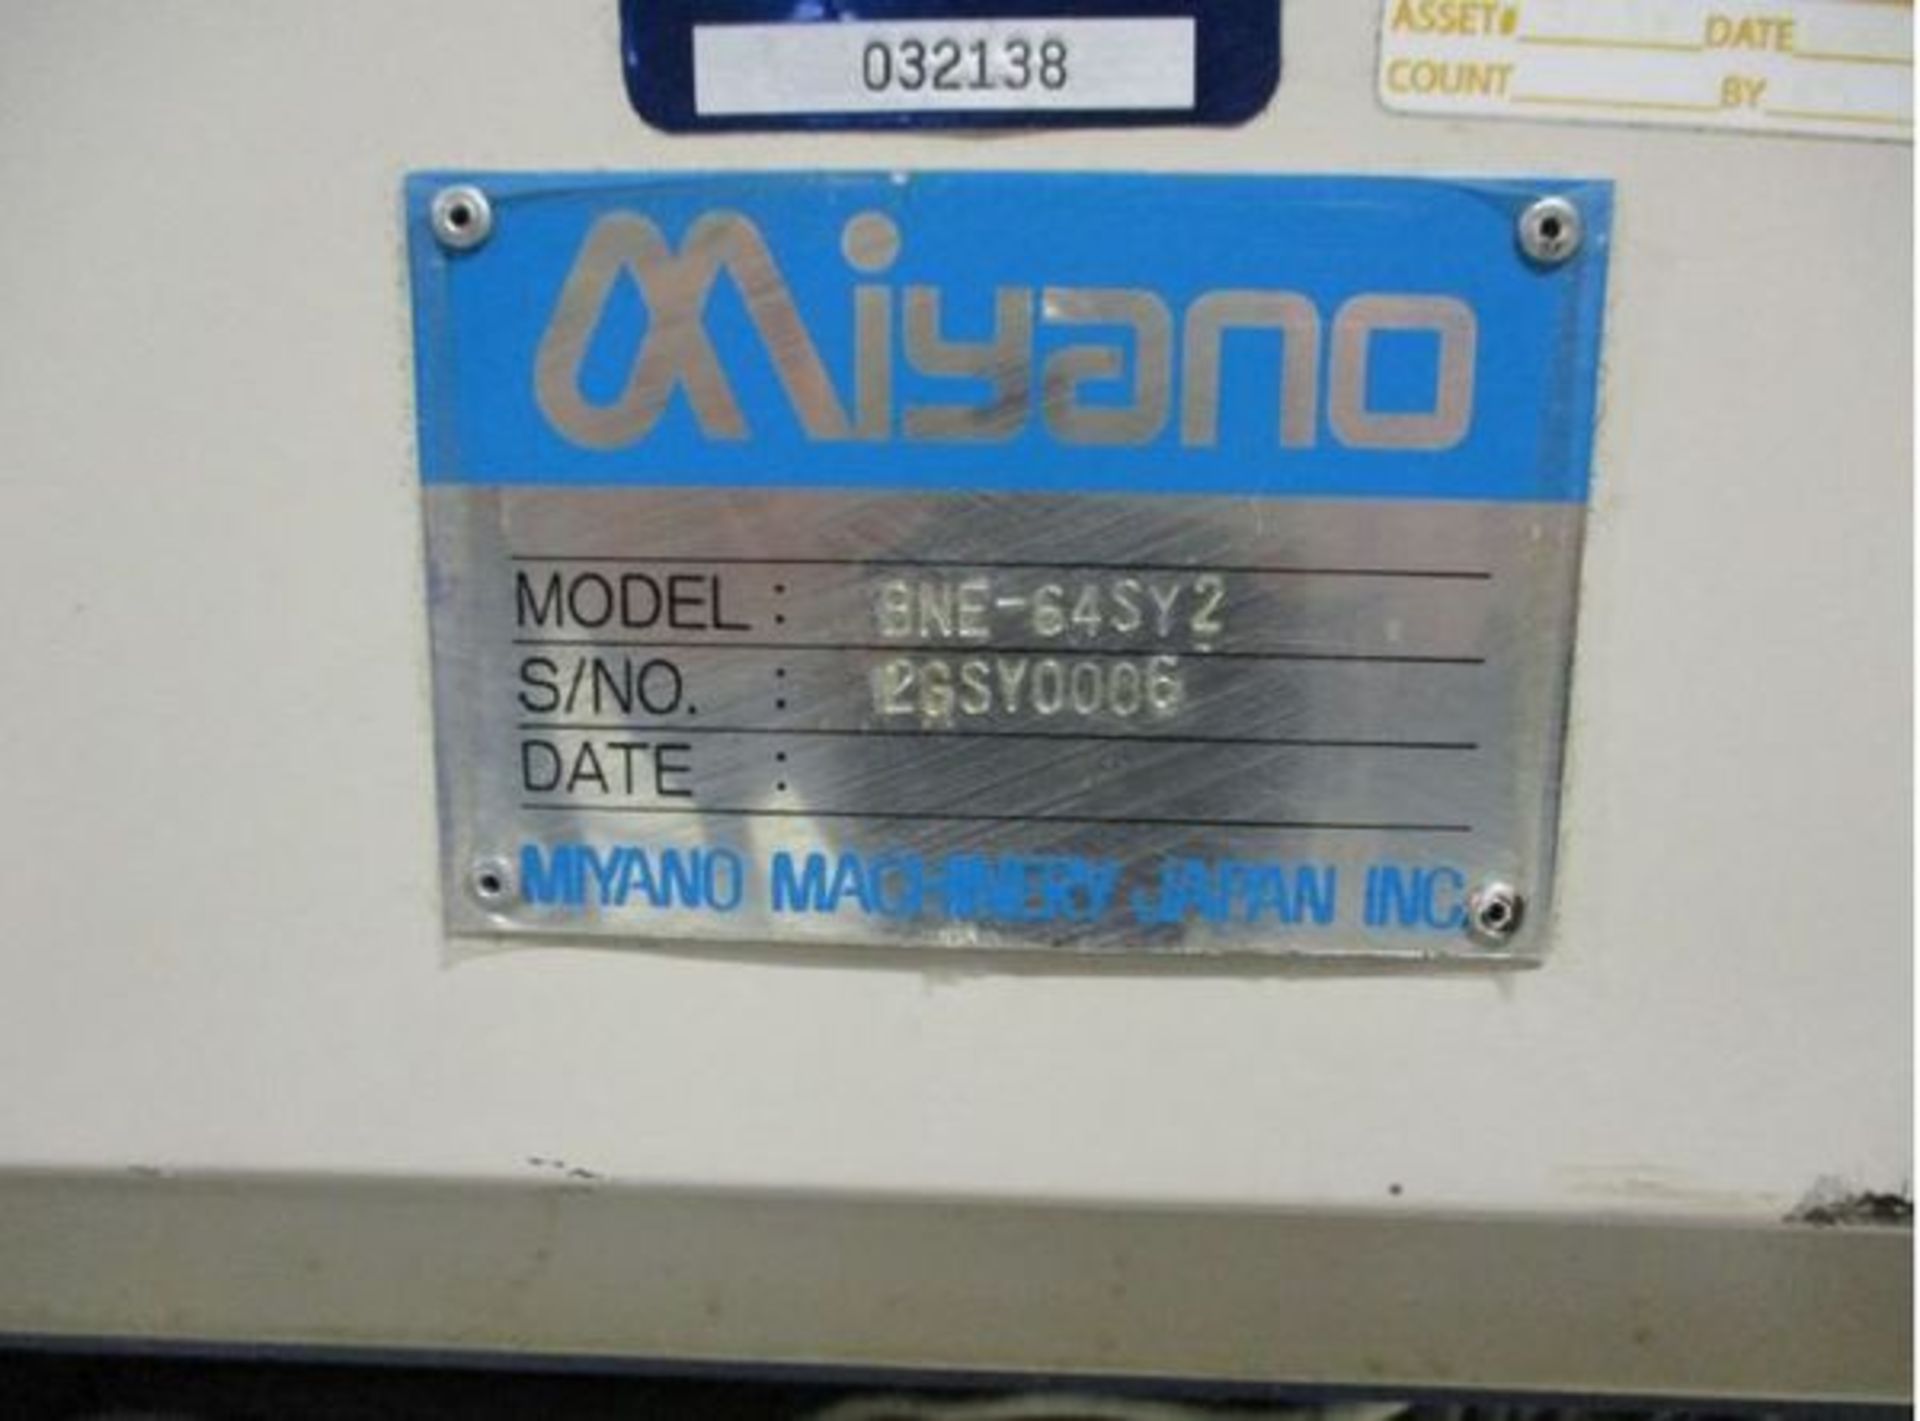 2005 MIYANO BNE-64SY2 CNC MULTI-AXIS TURNING CENTER, 2-TURRETS, Y-AXIS, SUB-SPINDLE, 8" CHUCK SIZE, - Image 18 of 18